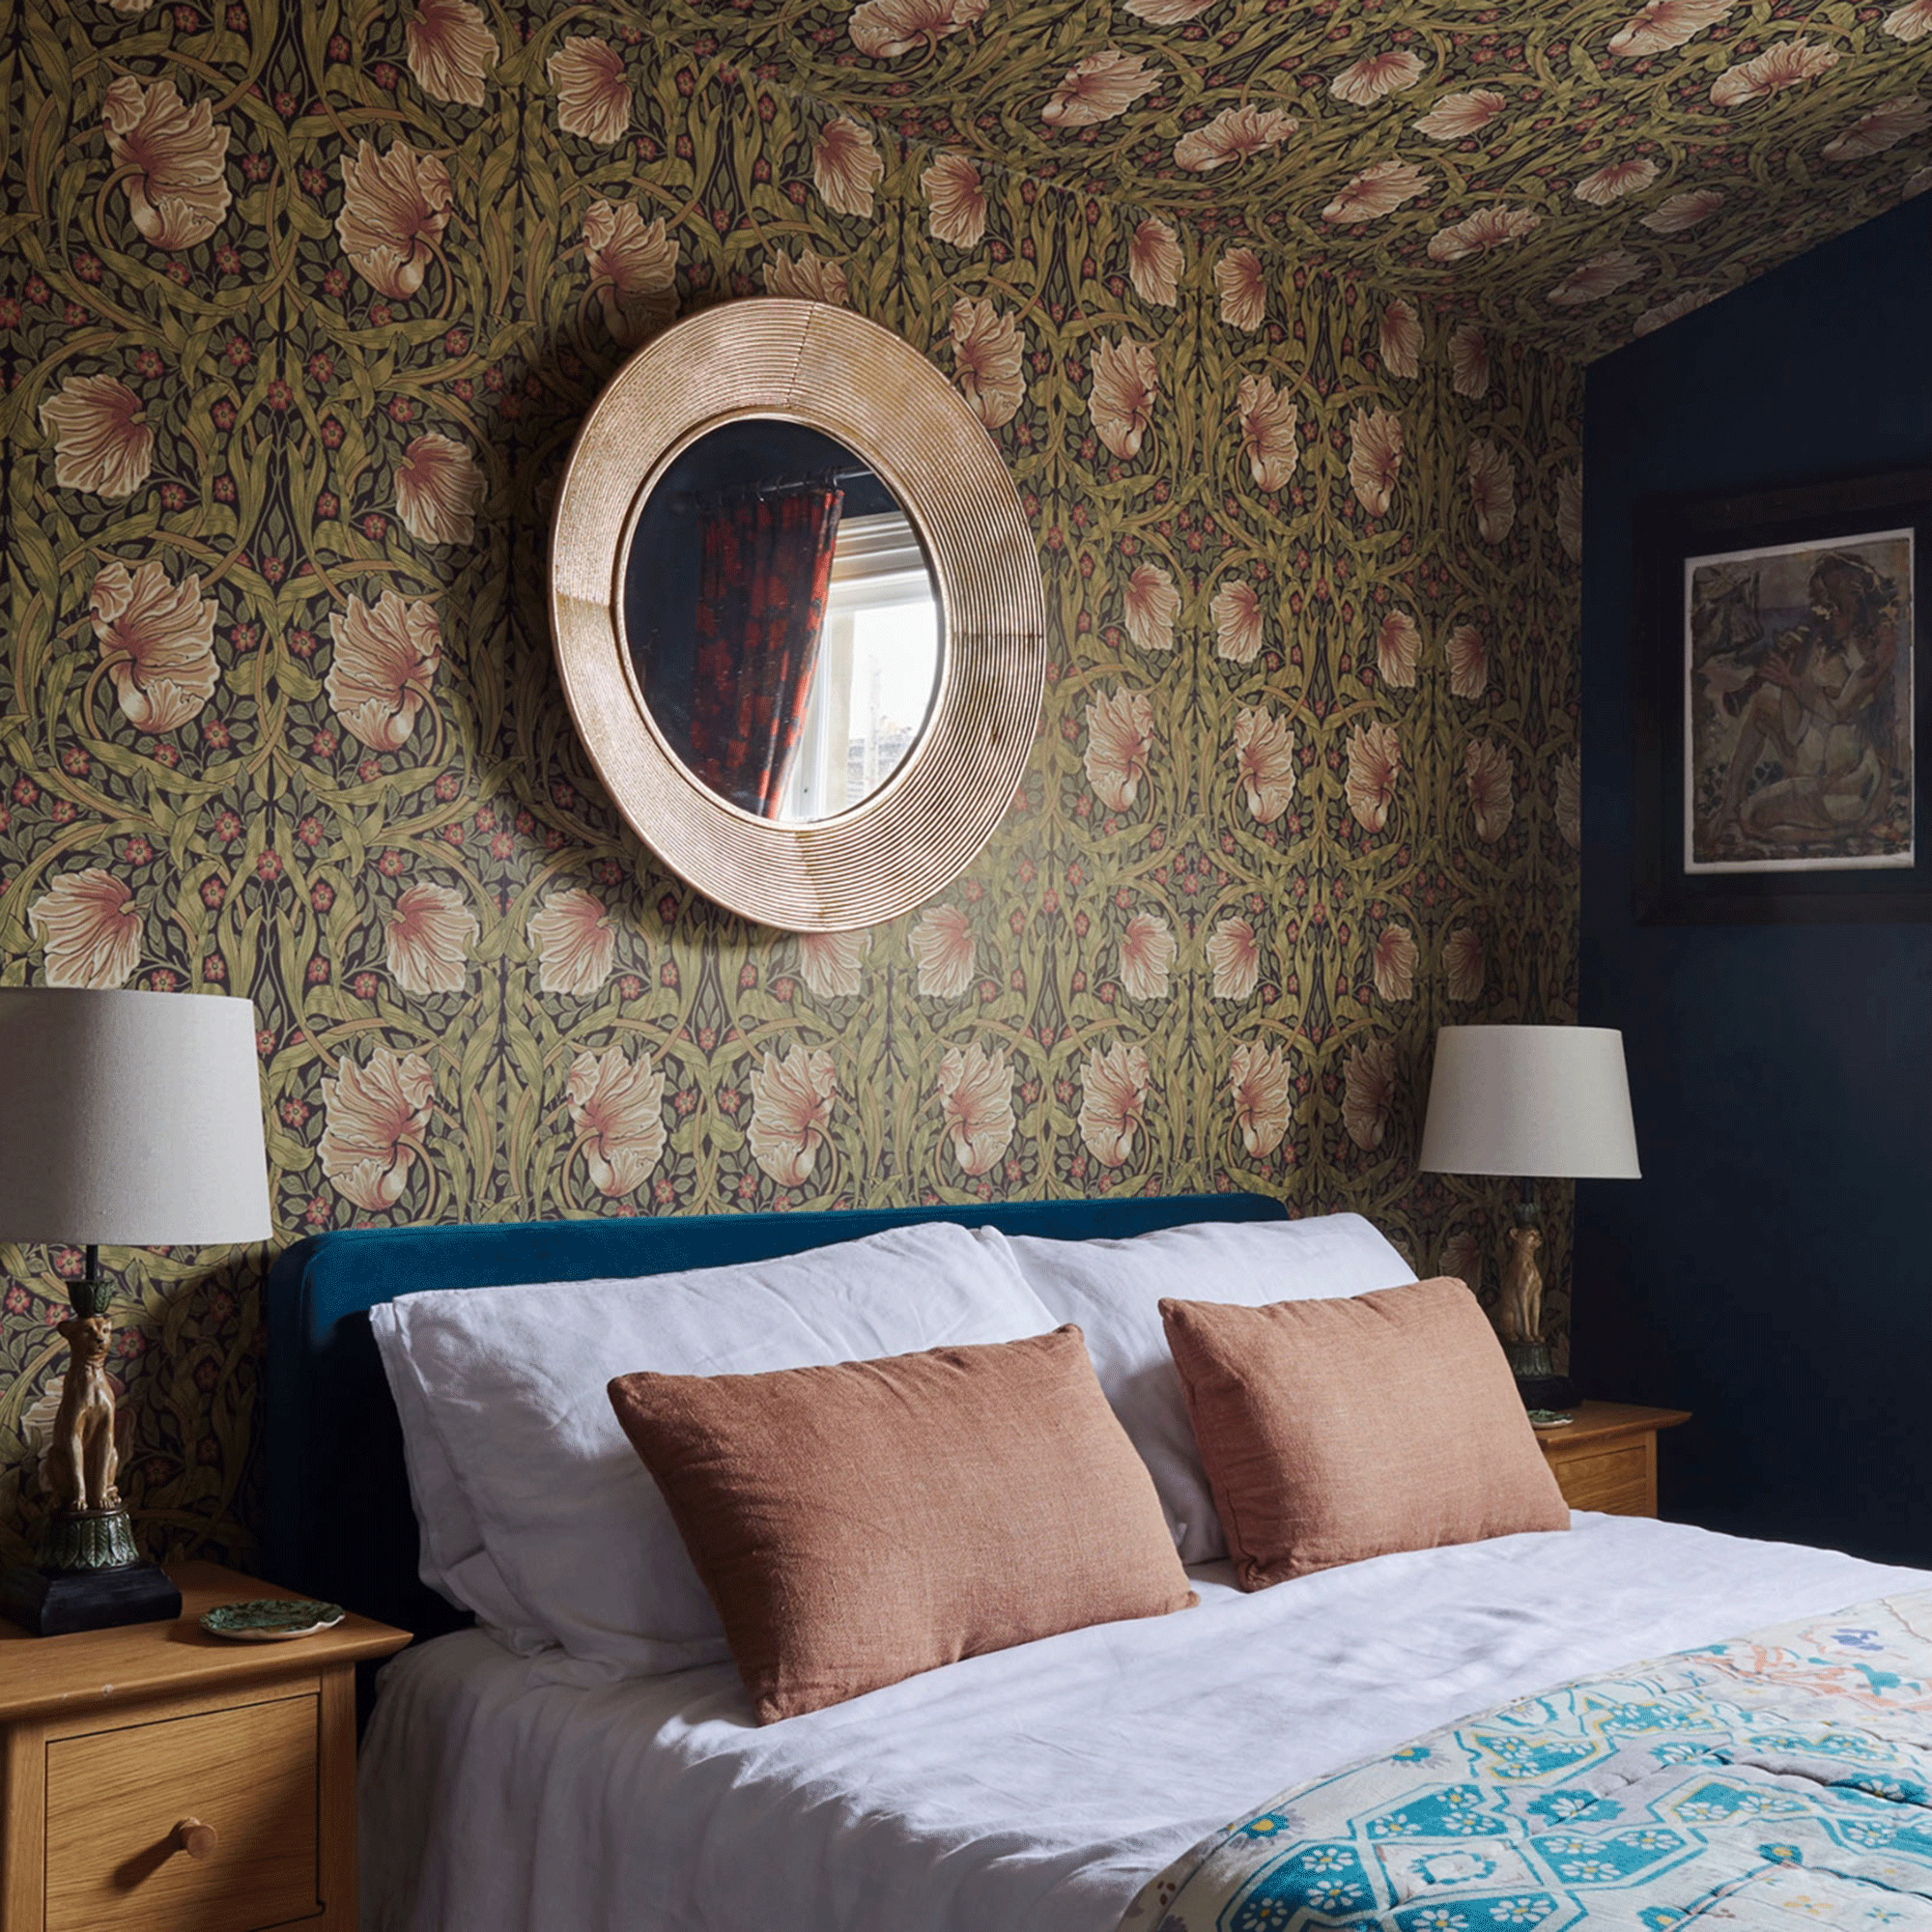 Wallpapered bedroom with mirror above bed